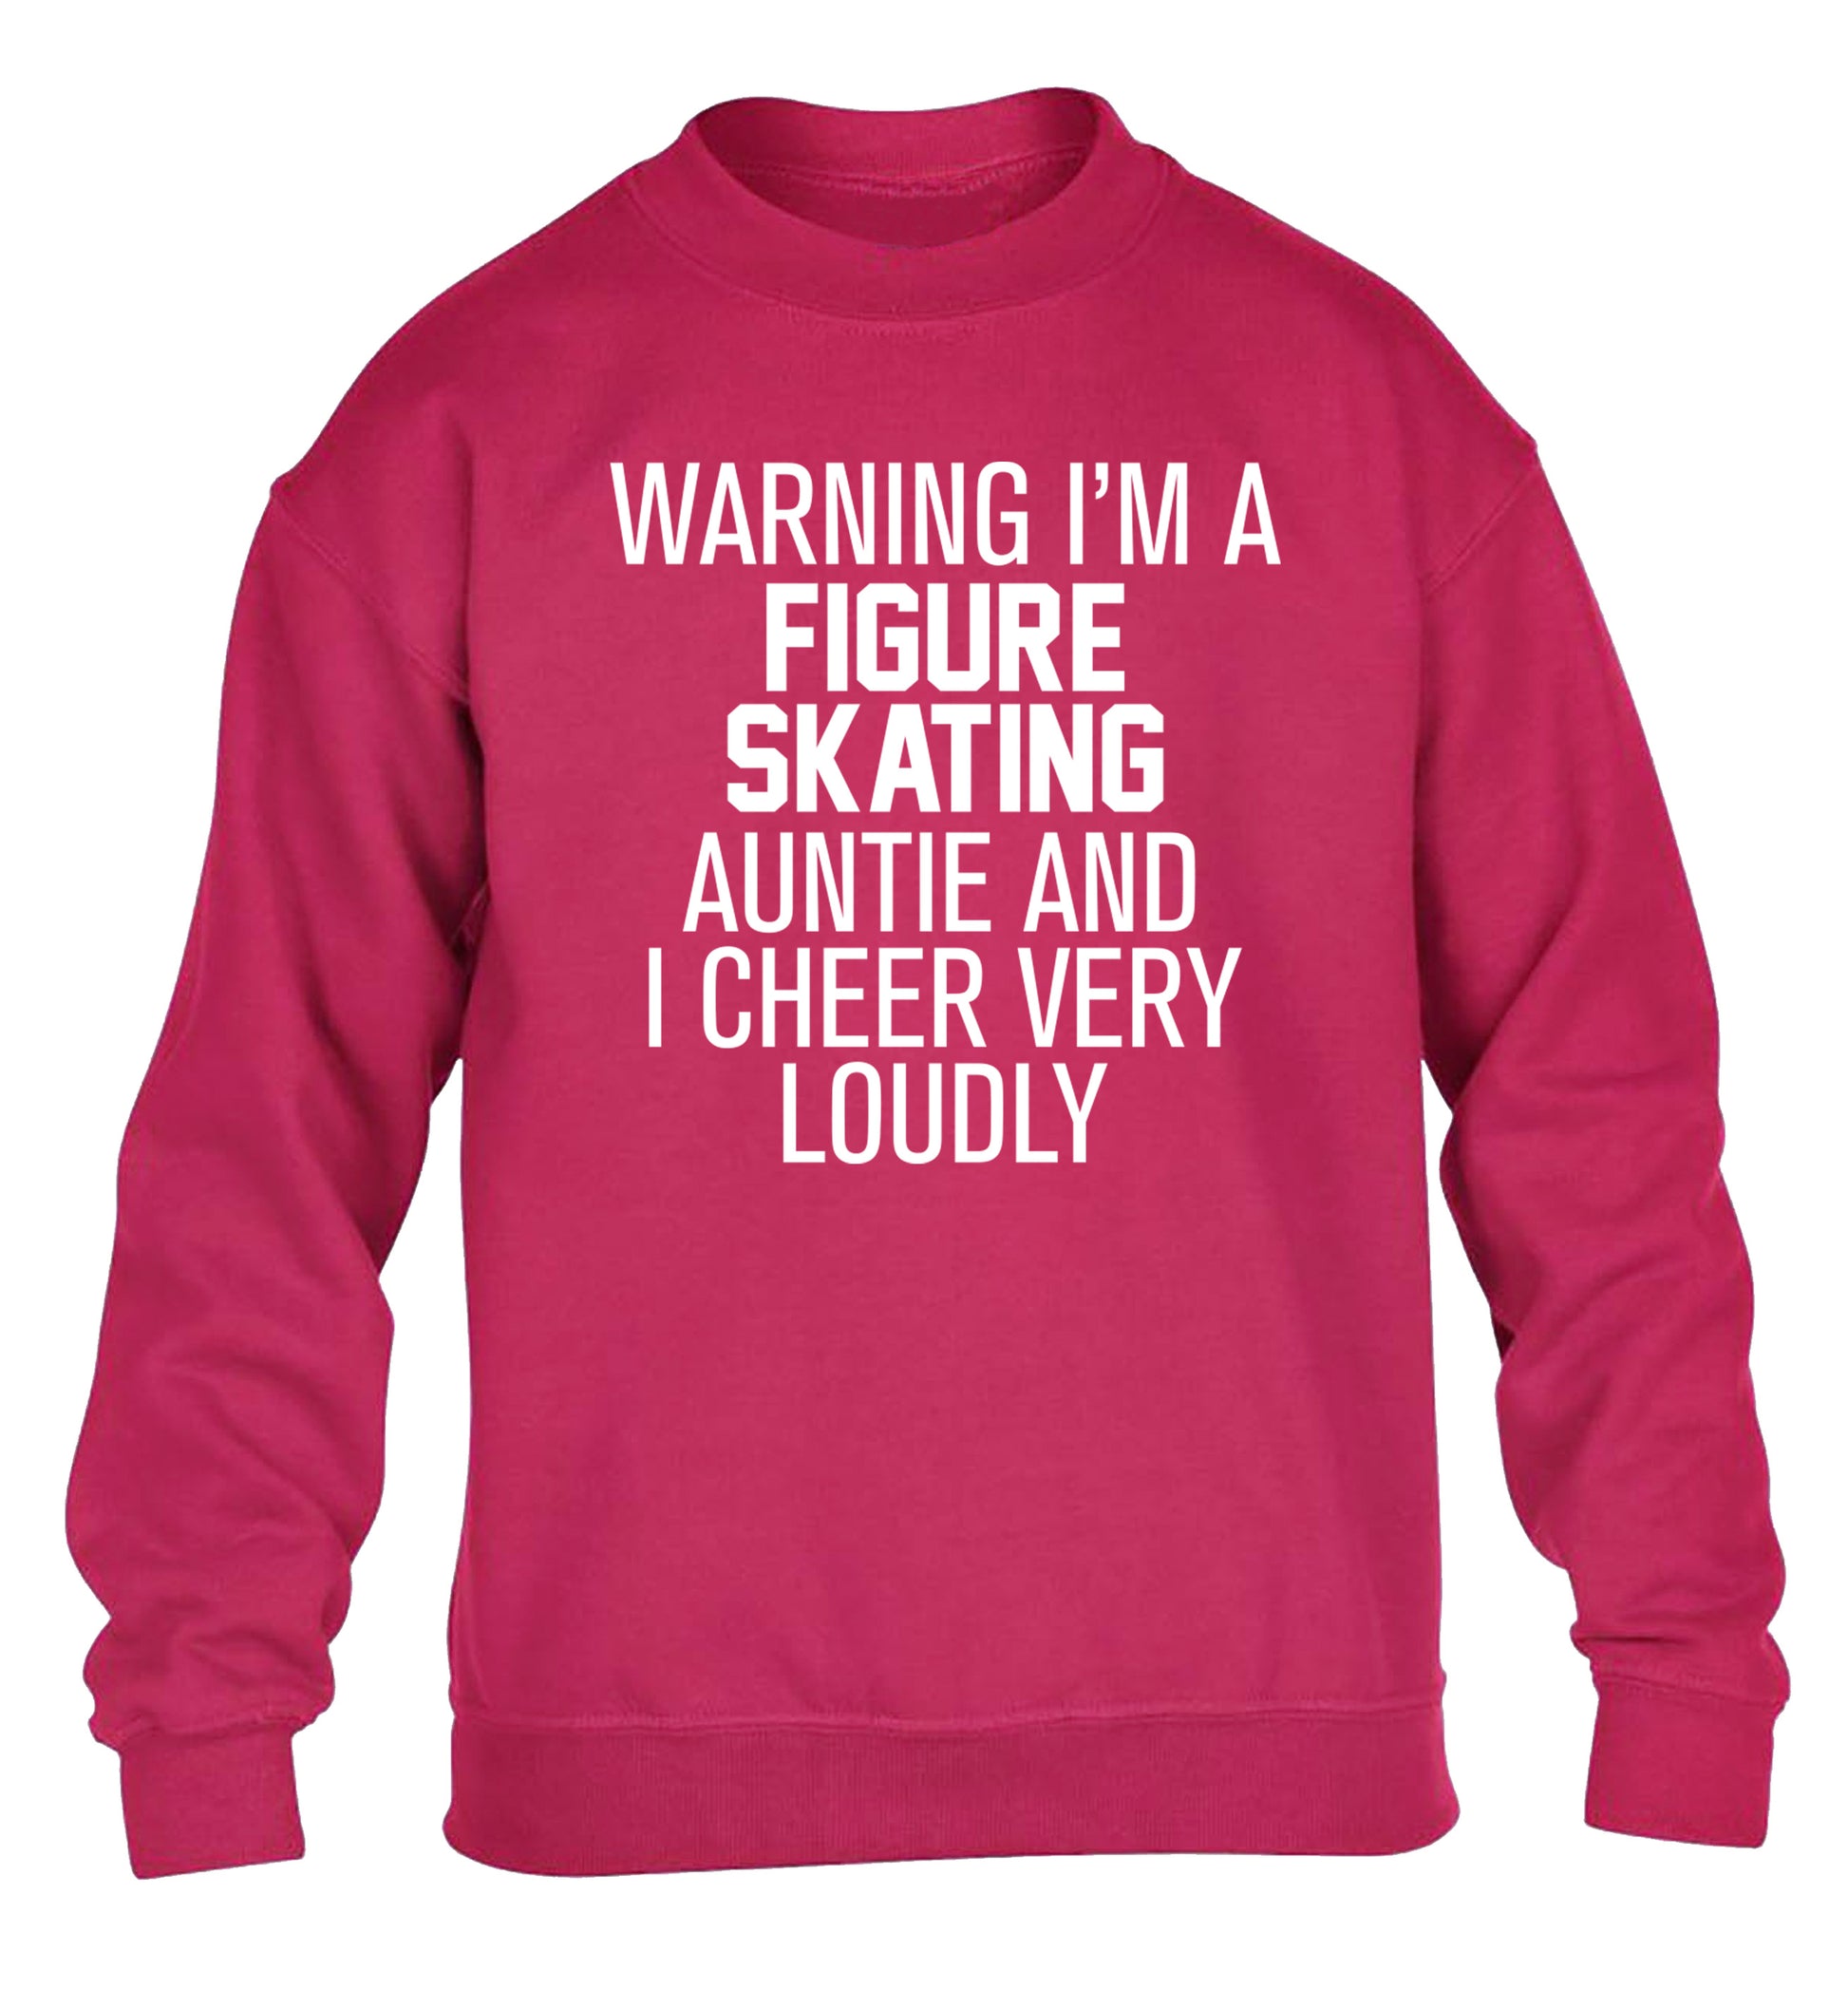 Warning I'm a figure skating auntie and I cheer very loudly children's pink sweater 12-14 Years